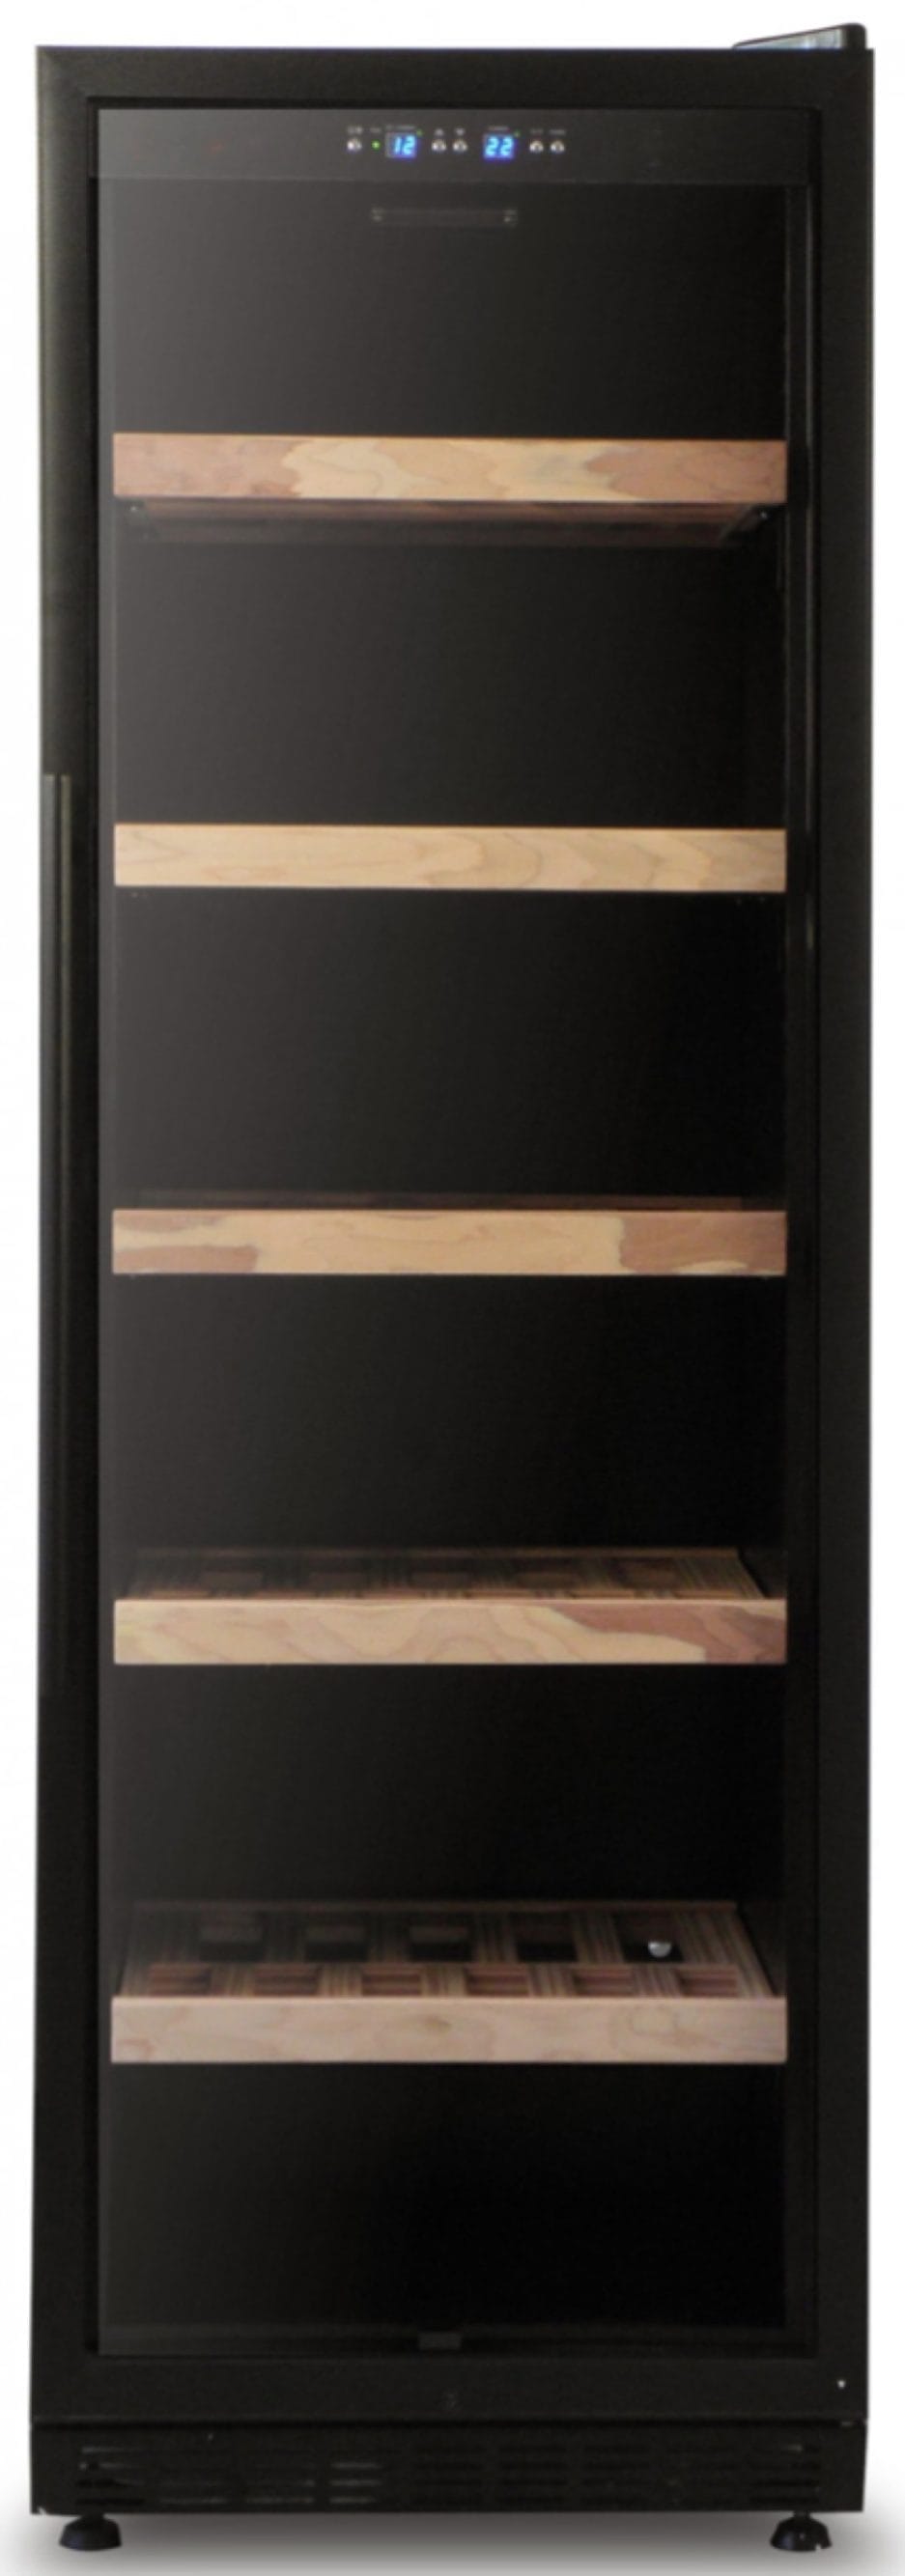 High black Bier climate cabinet with glass door and five wooden shelves, with a digital temperature control panel at the top.